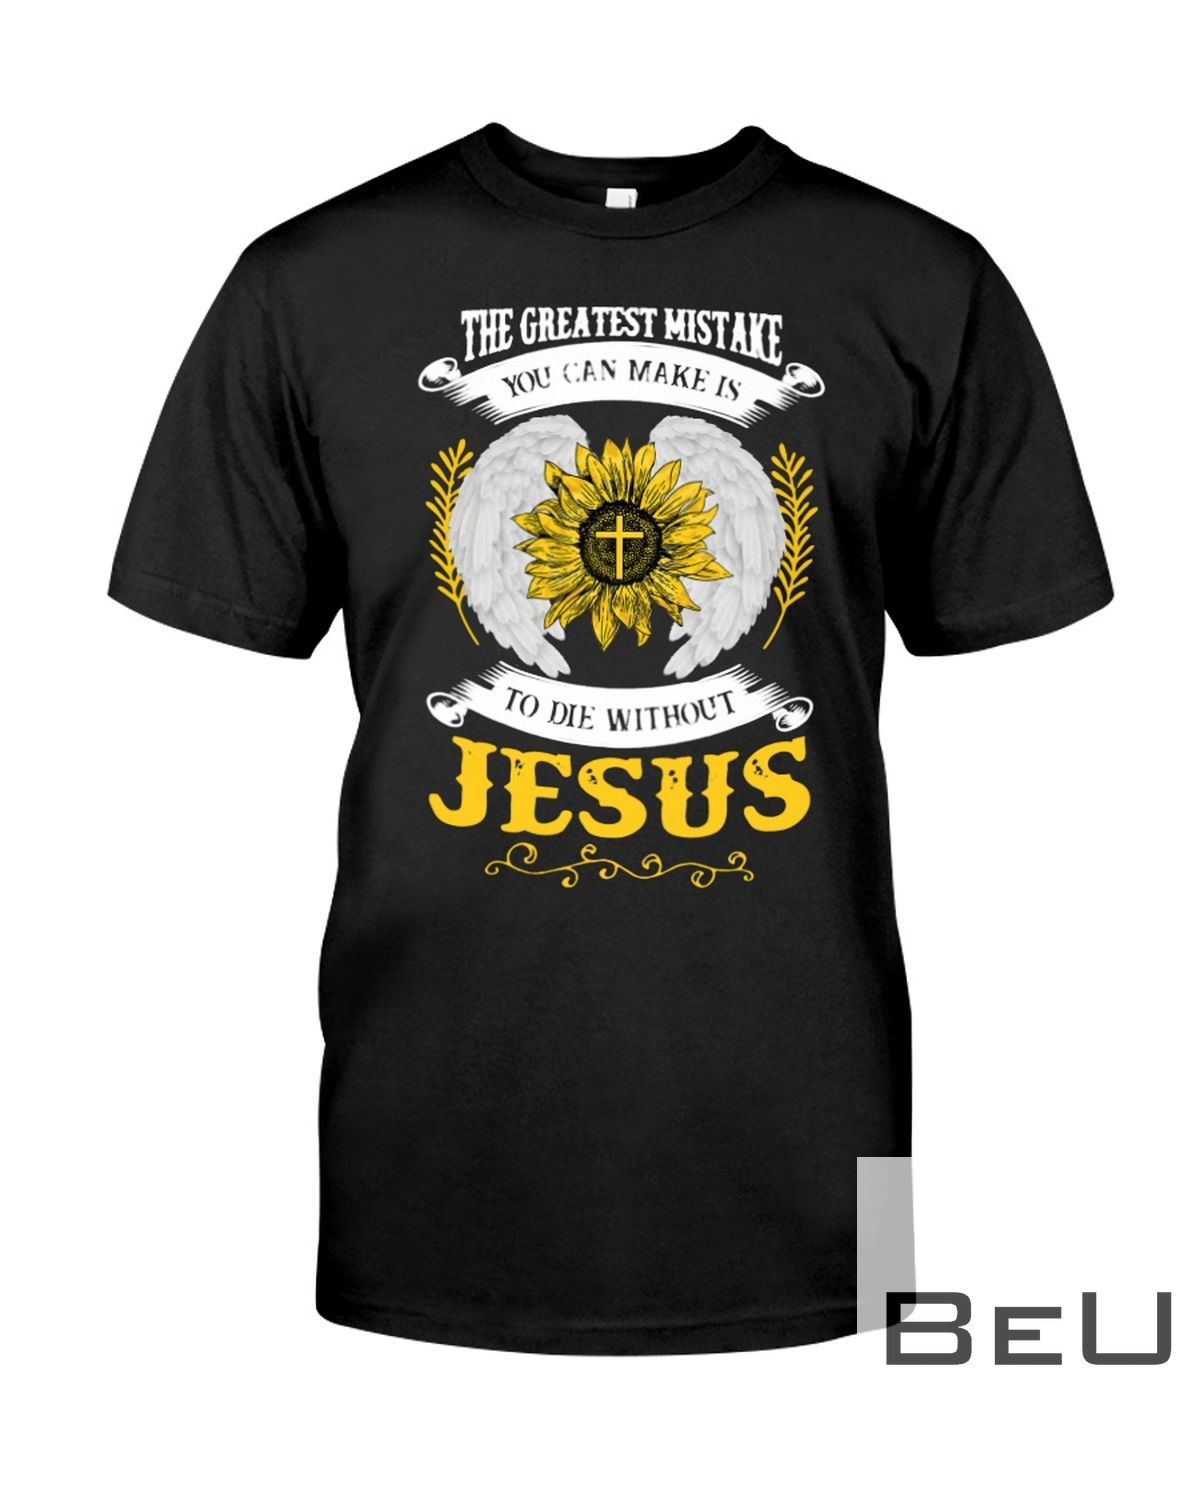 The Greatest Mistake You Can Make Is To Die Without Jesus Sunflower Shirt